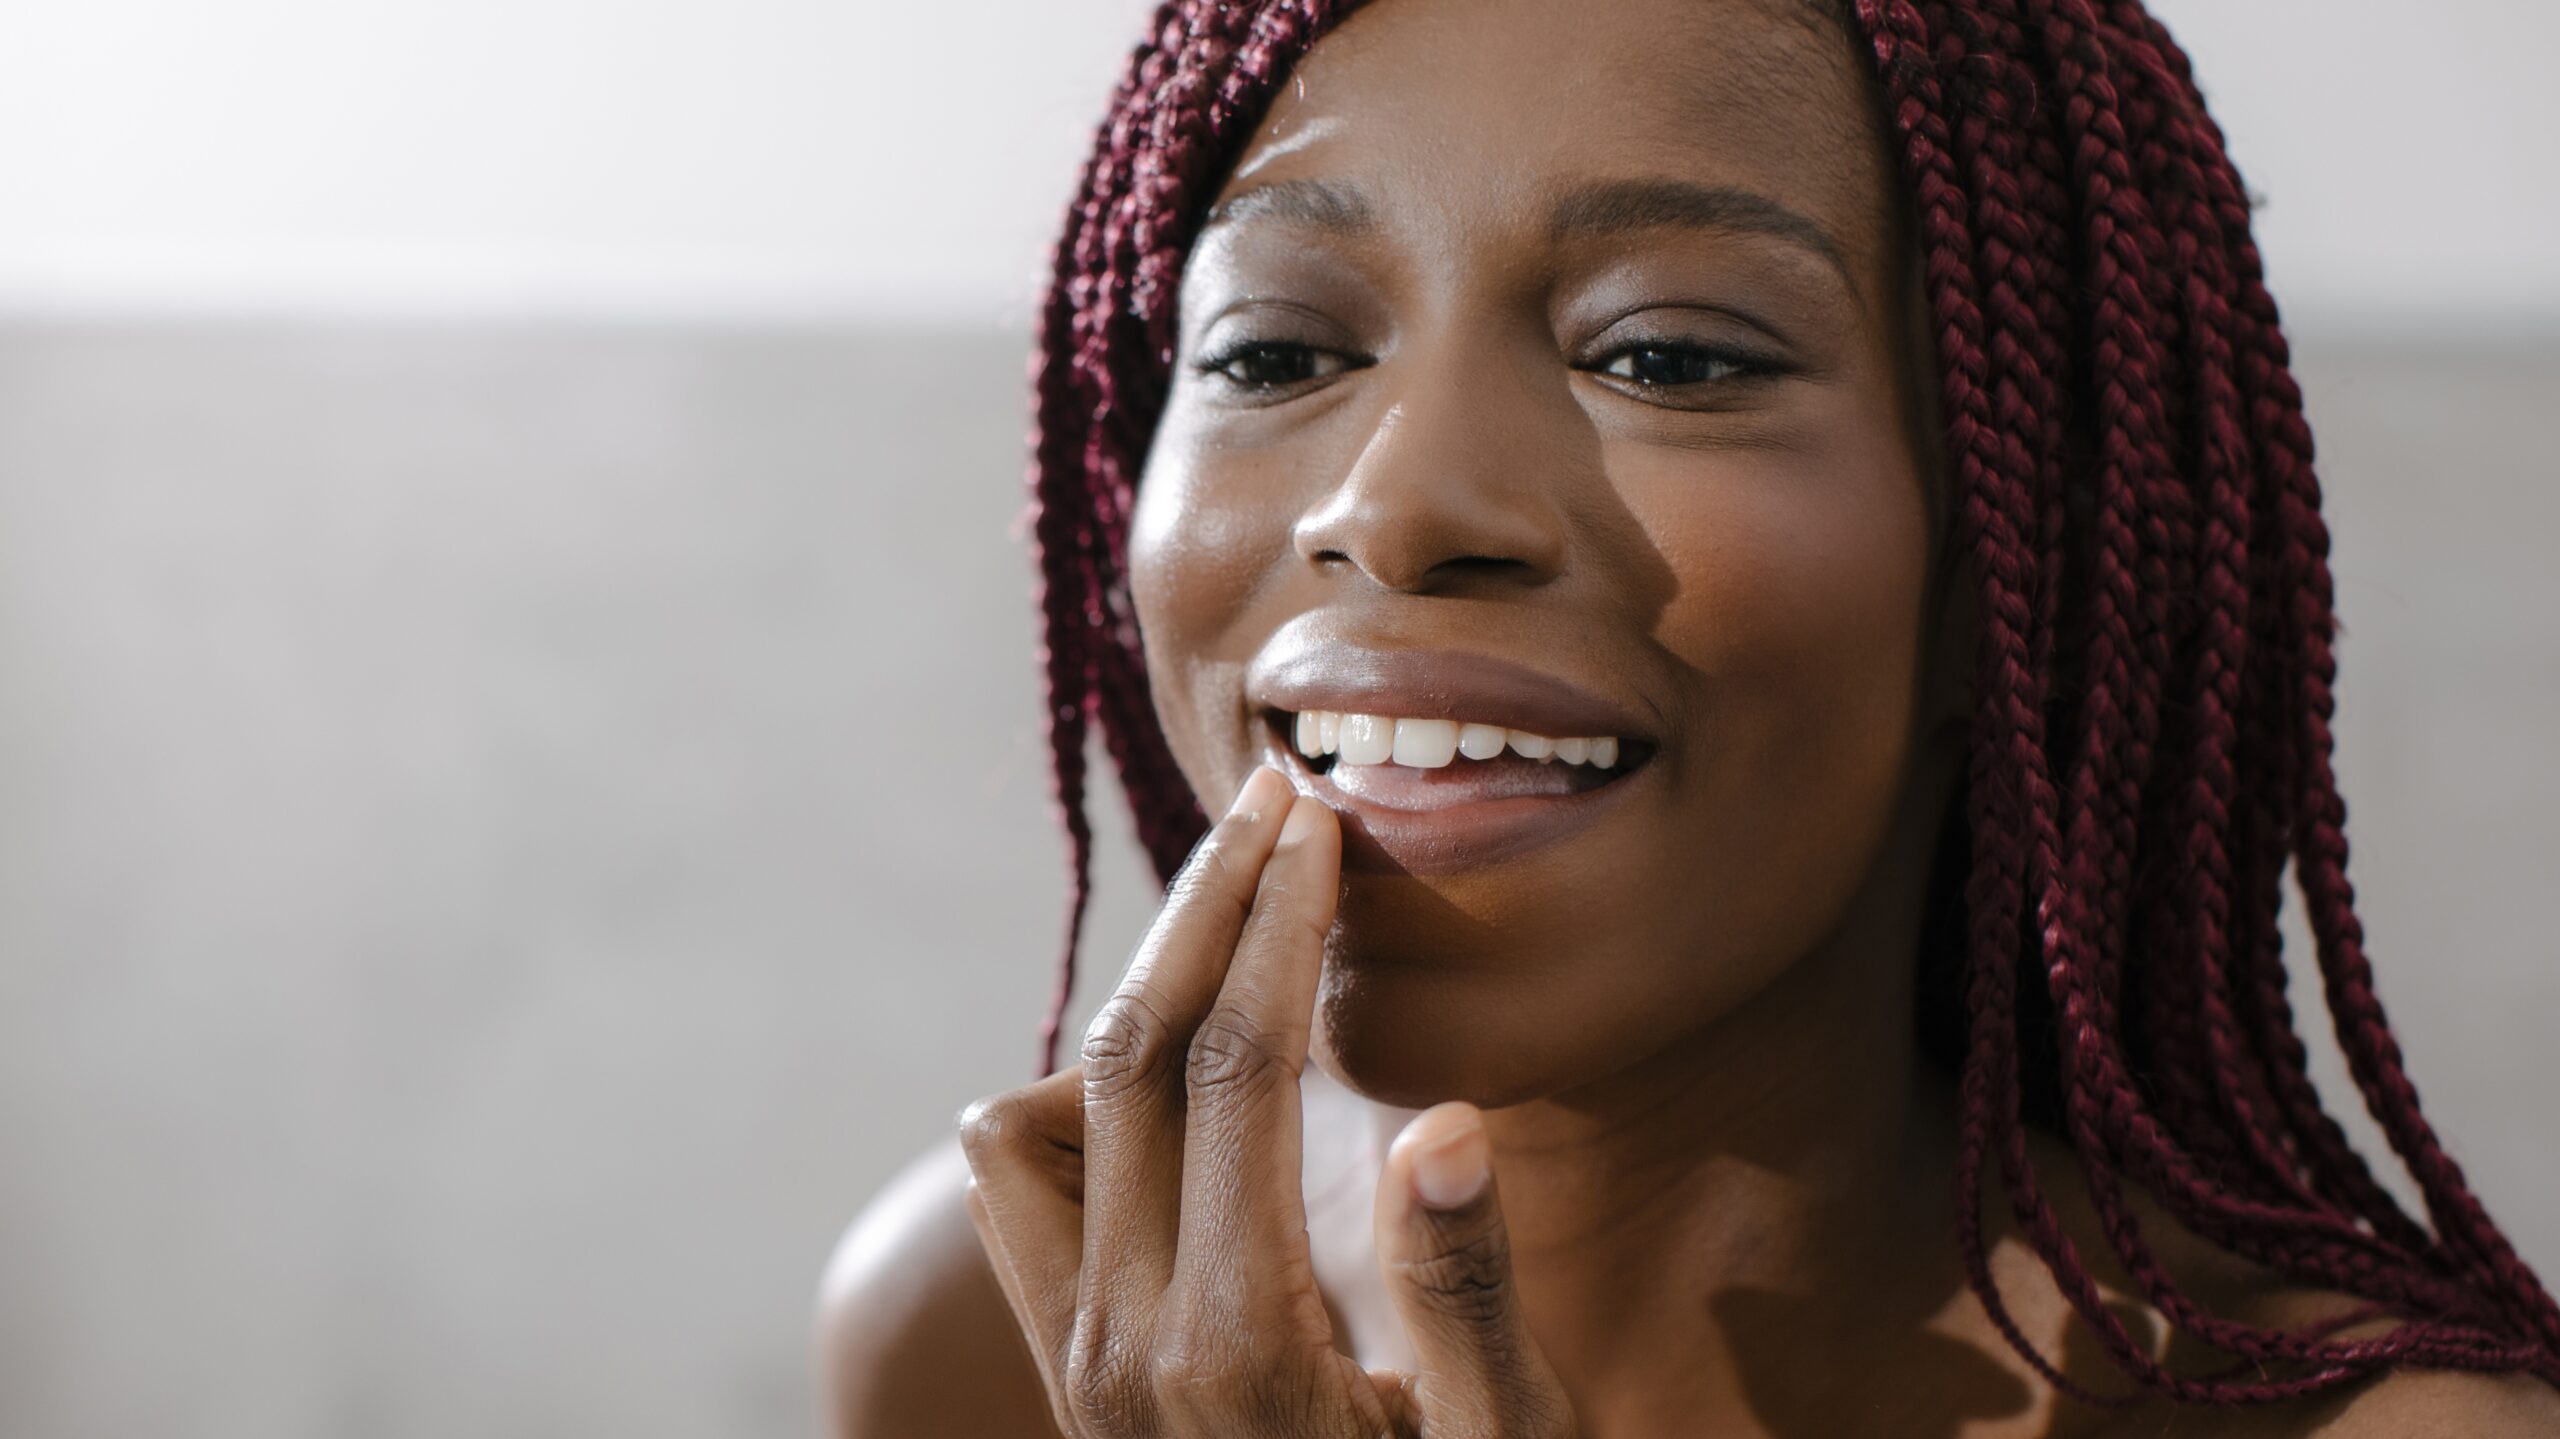 The Do’s And Don’t’s Of Lip Care